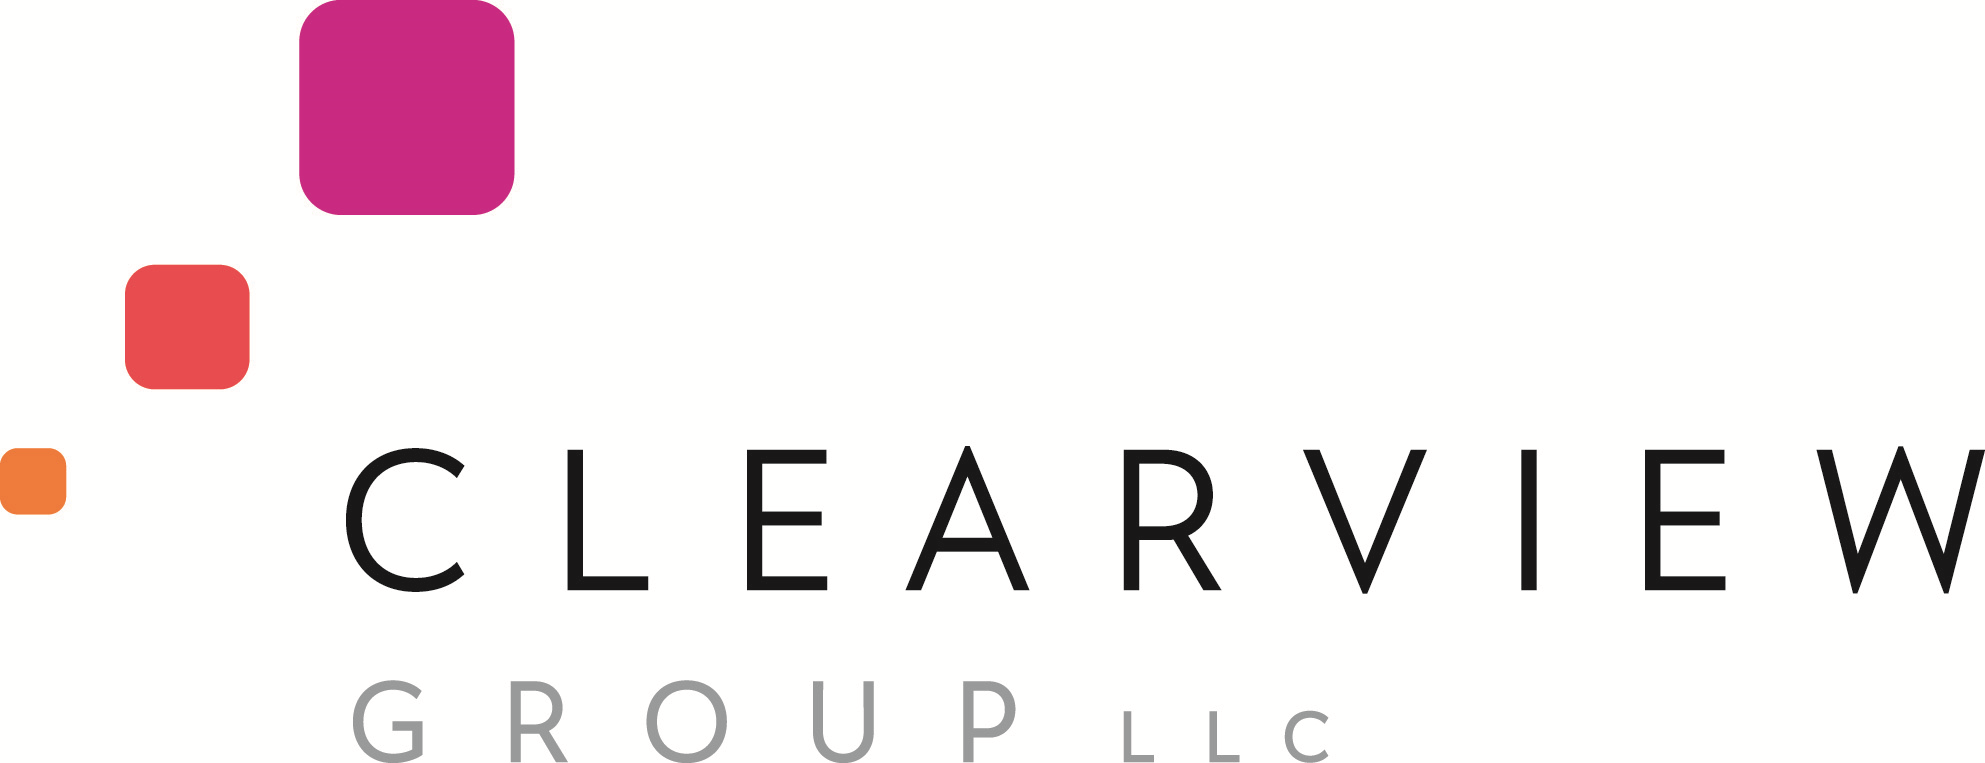 Clearview Group, LLC Company Logo